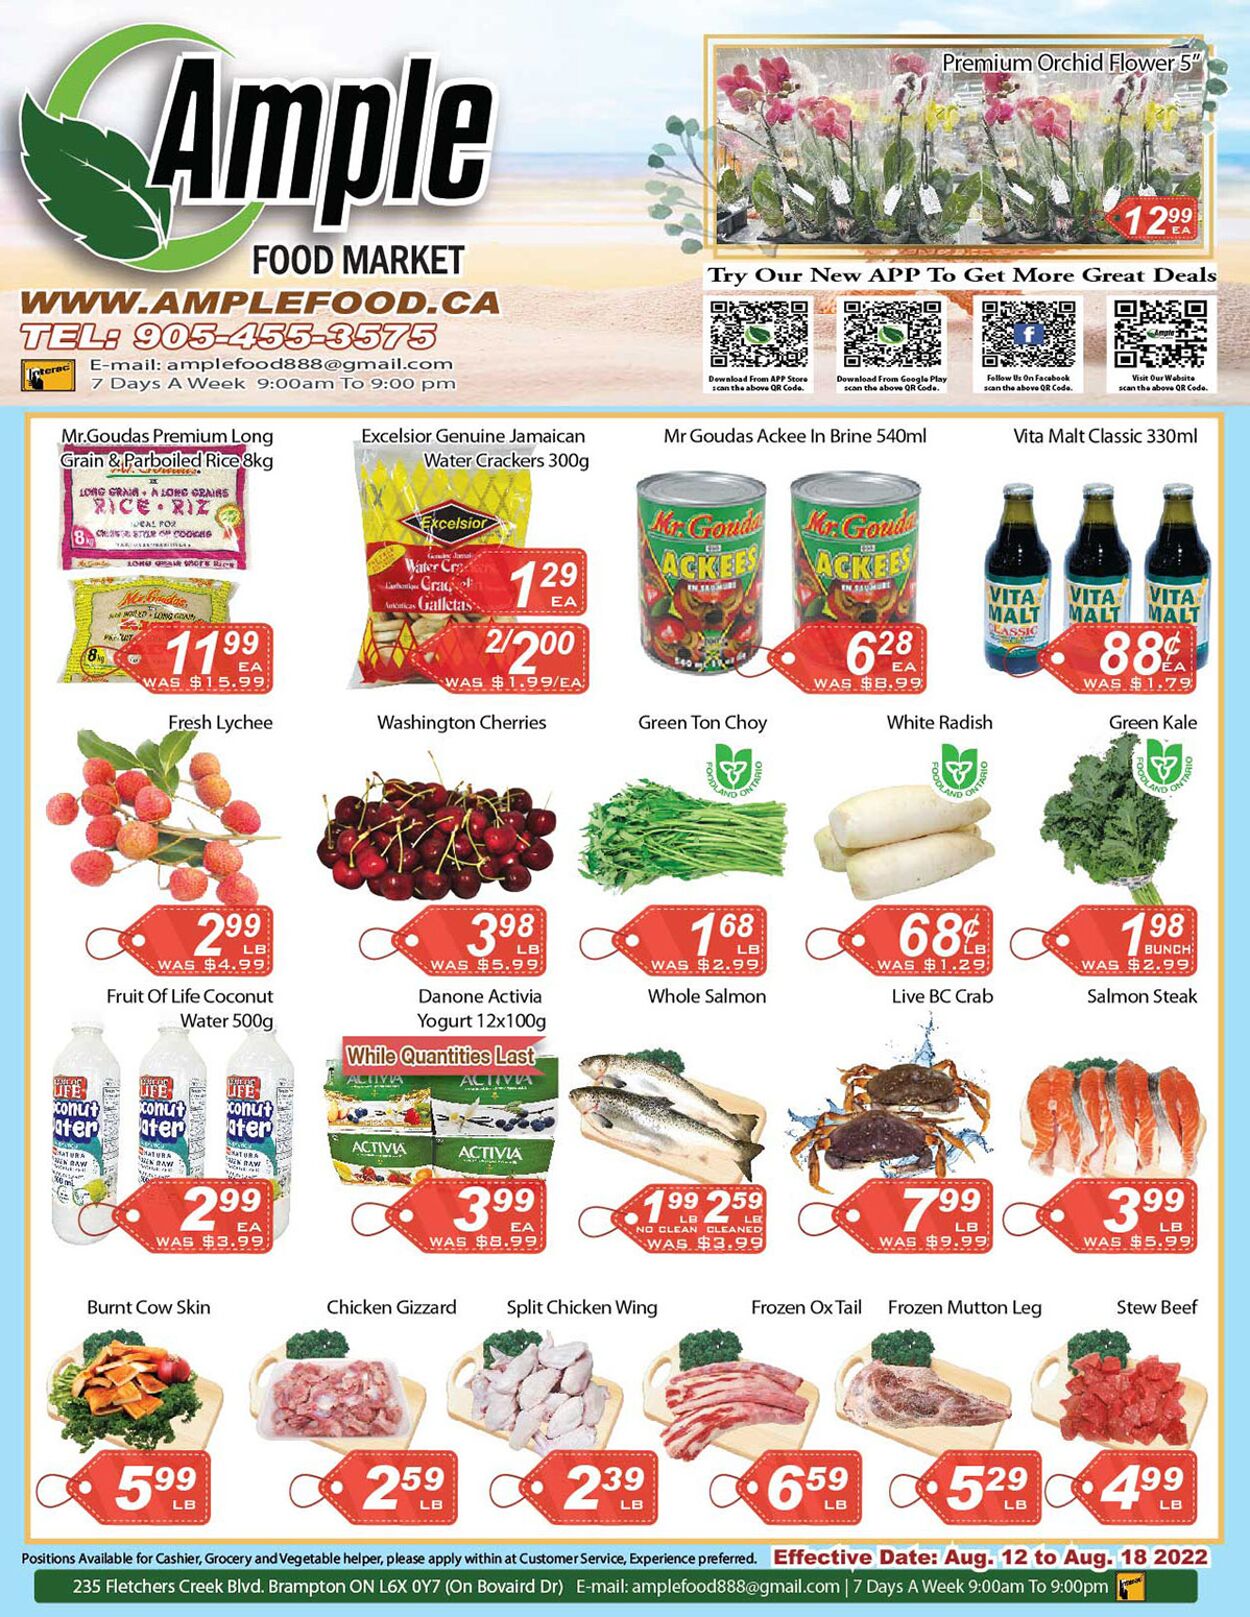 Ample Food Promotional flyers